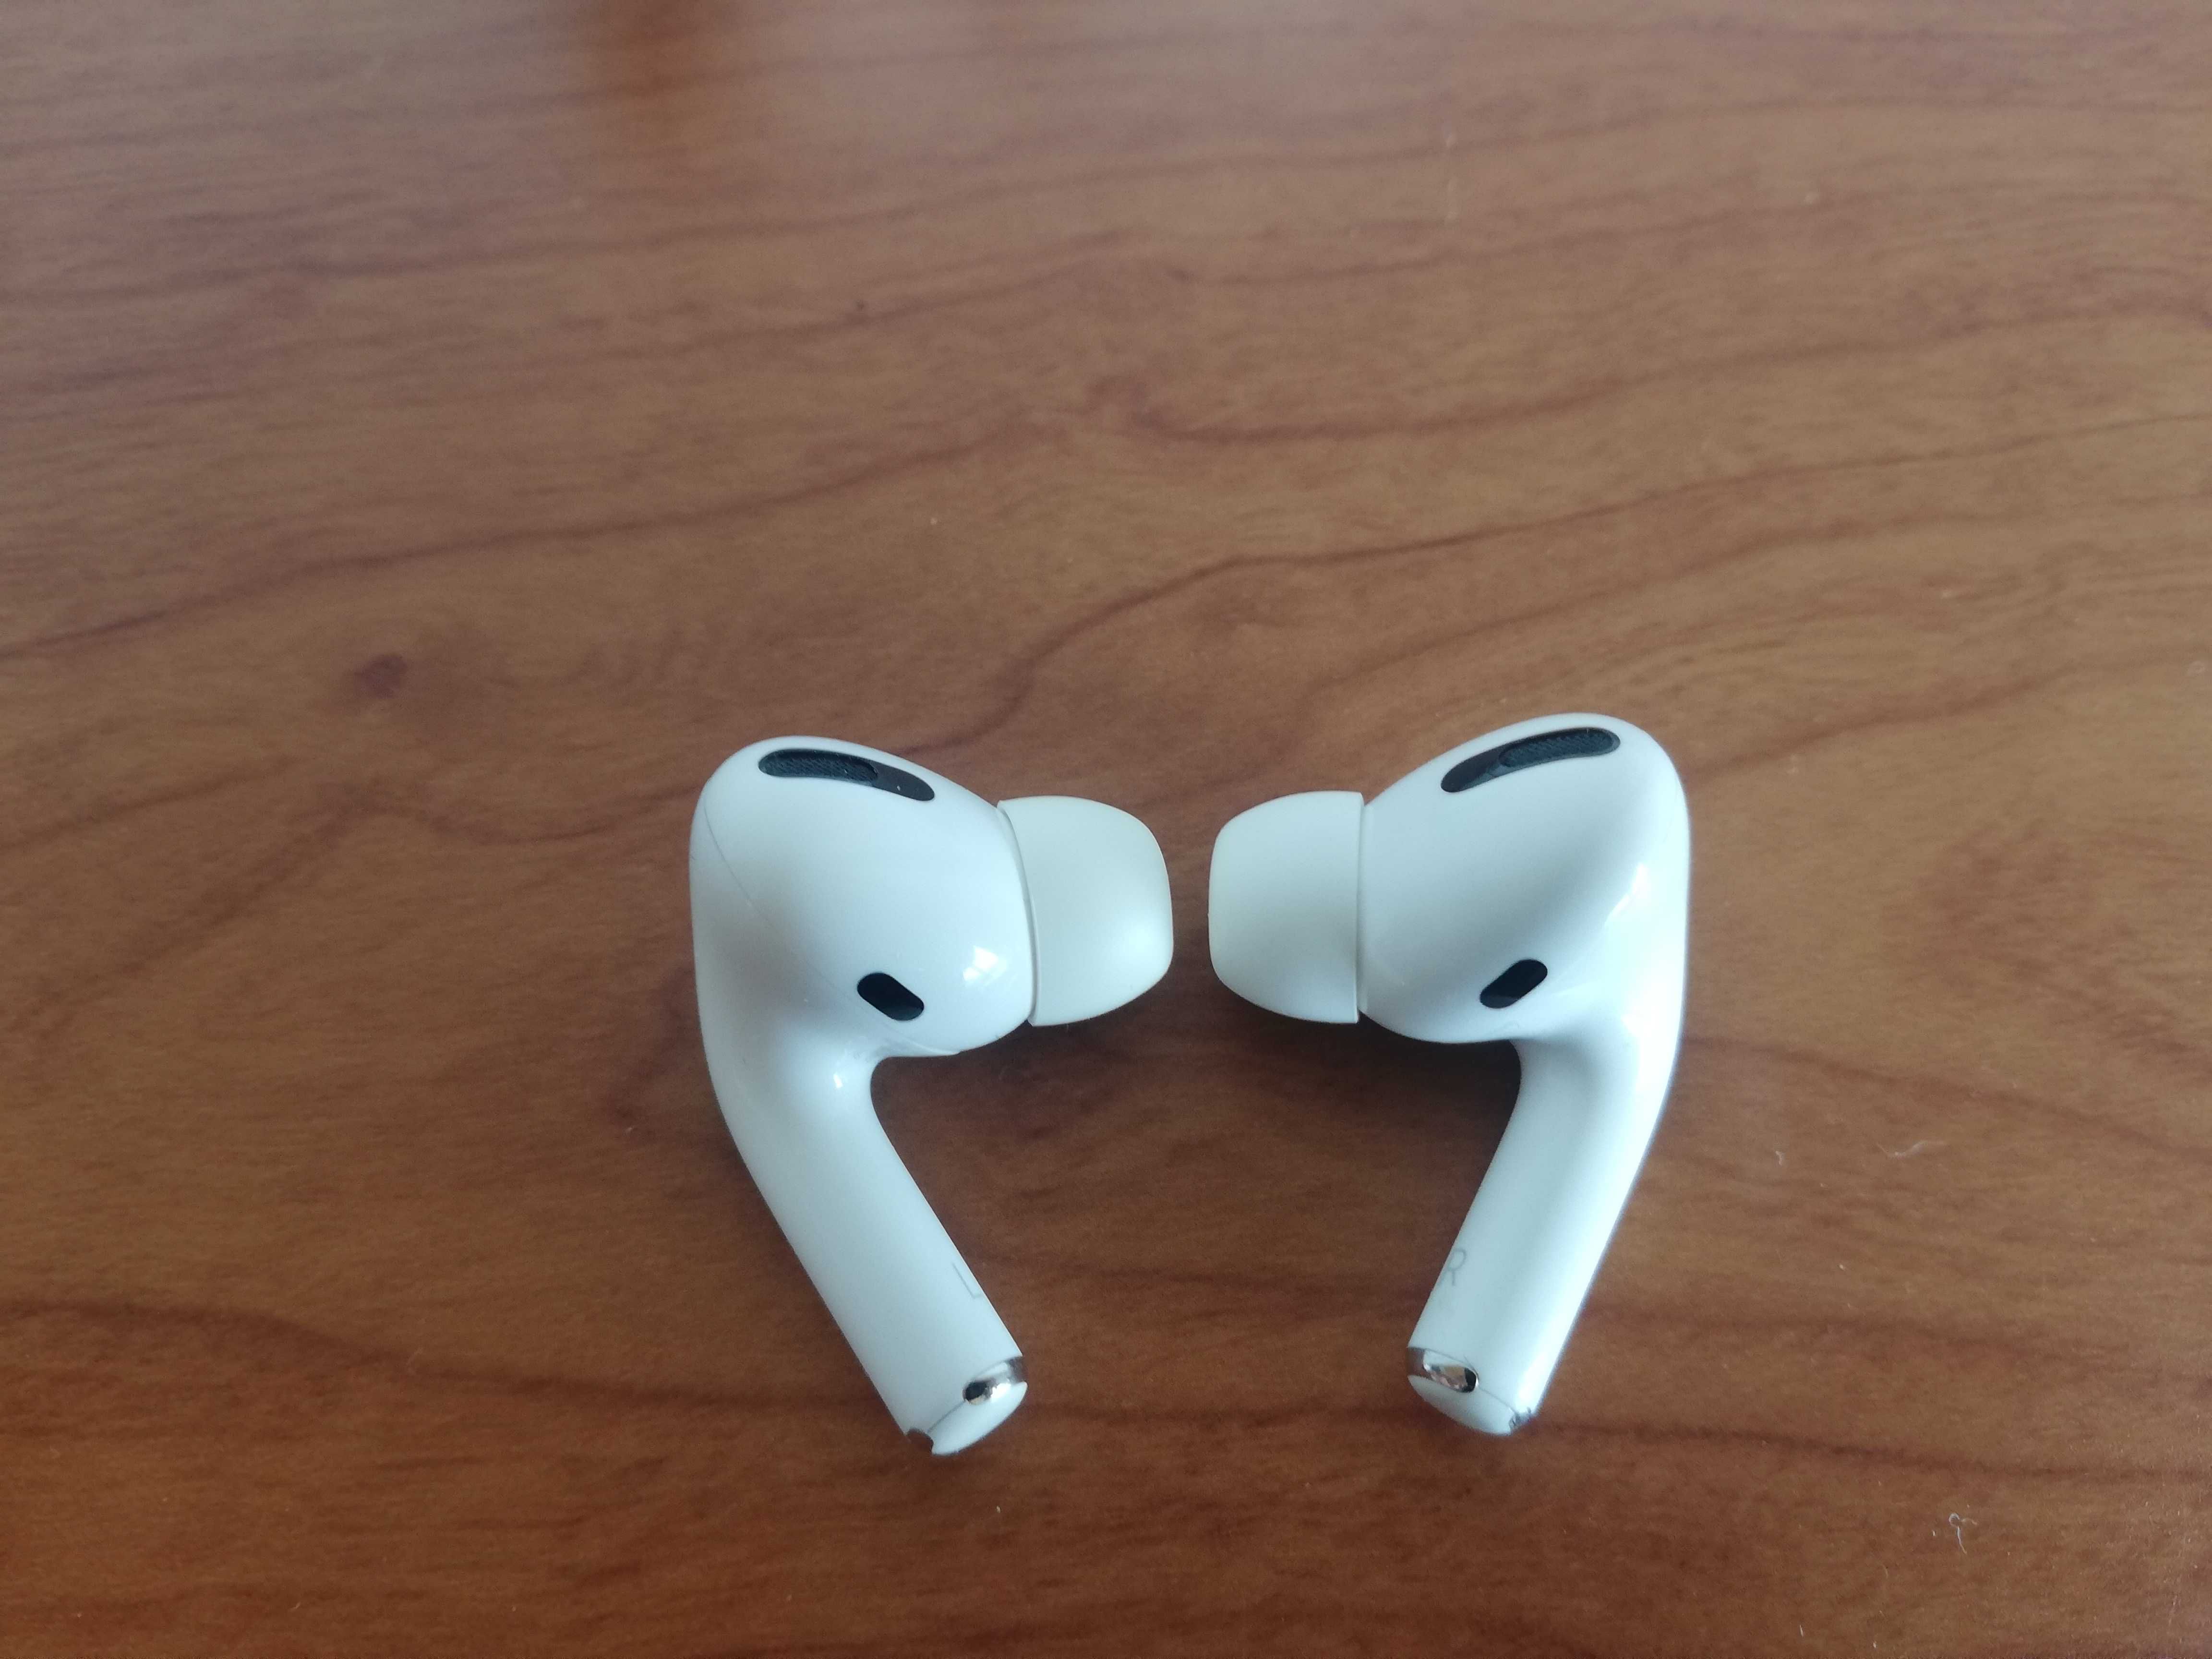 Apple AirPods Pro with Wireless Charging Case A2190